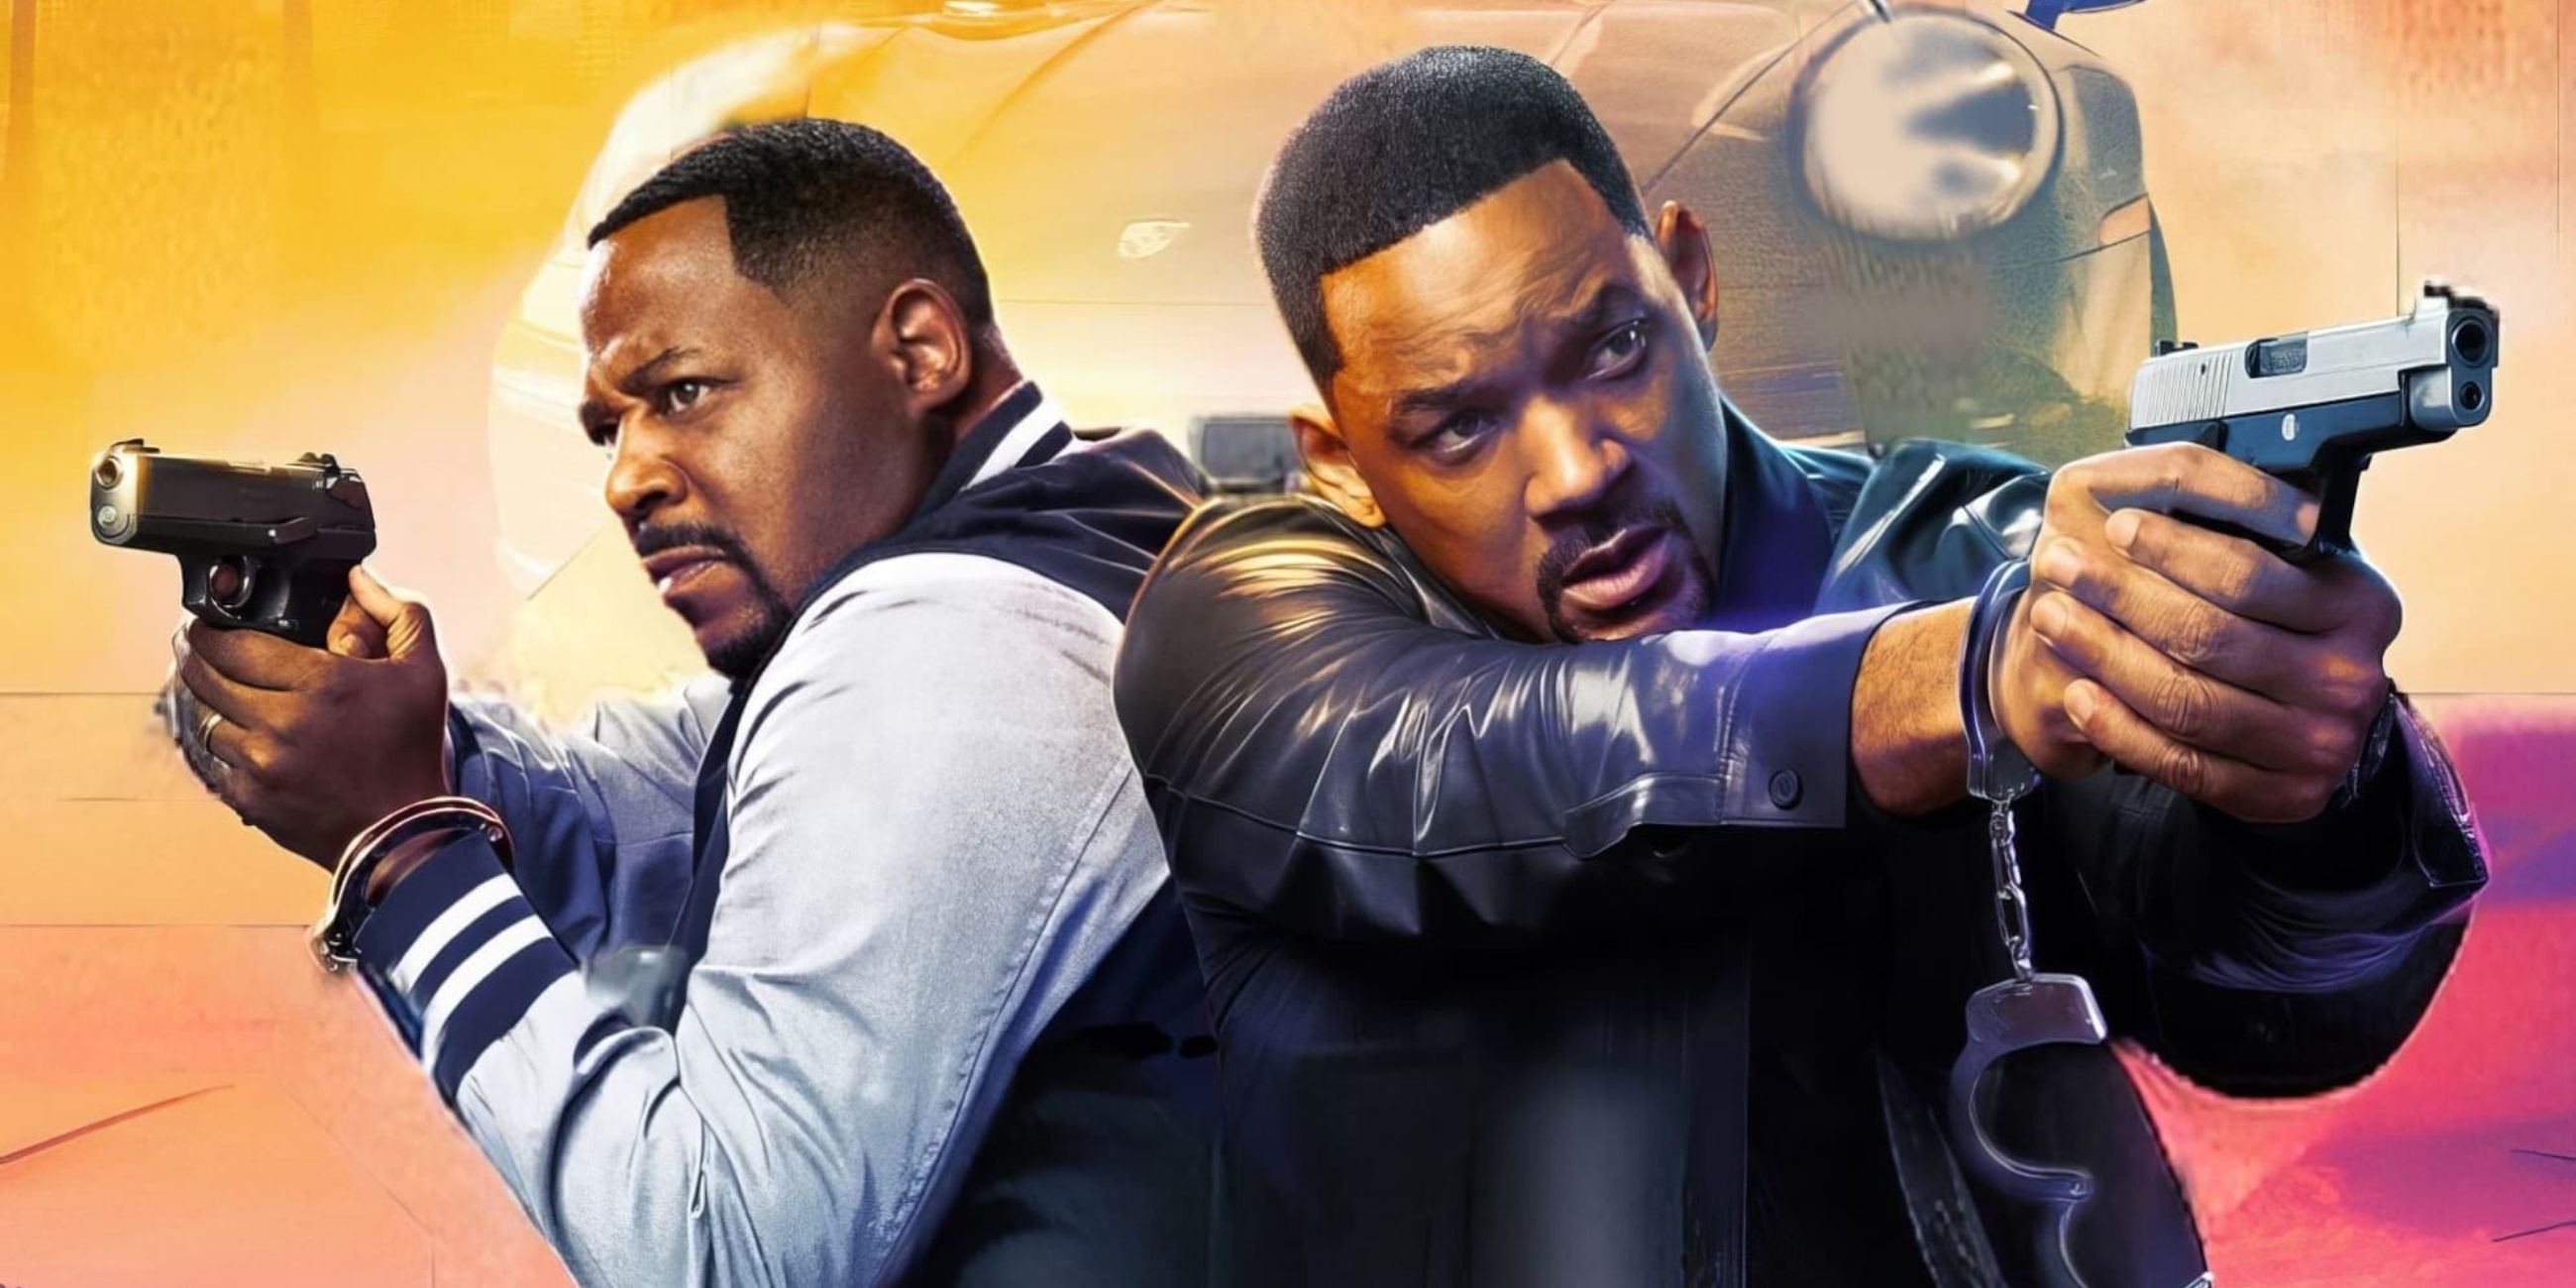 Will Smith and Martin Lawrence pointing guns on the poster for Bad Boys: Ride or Die